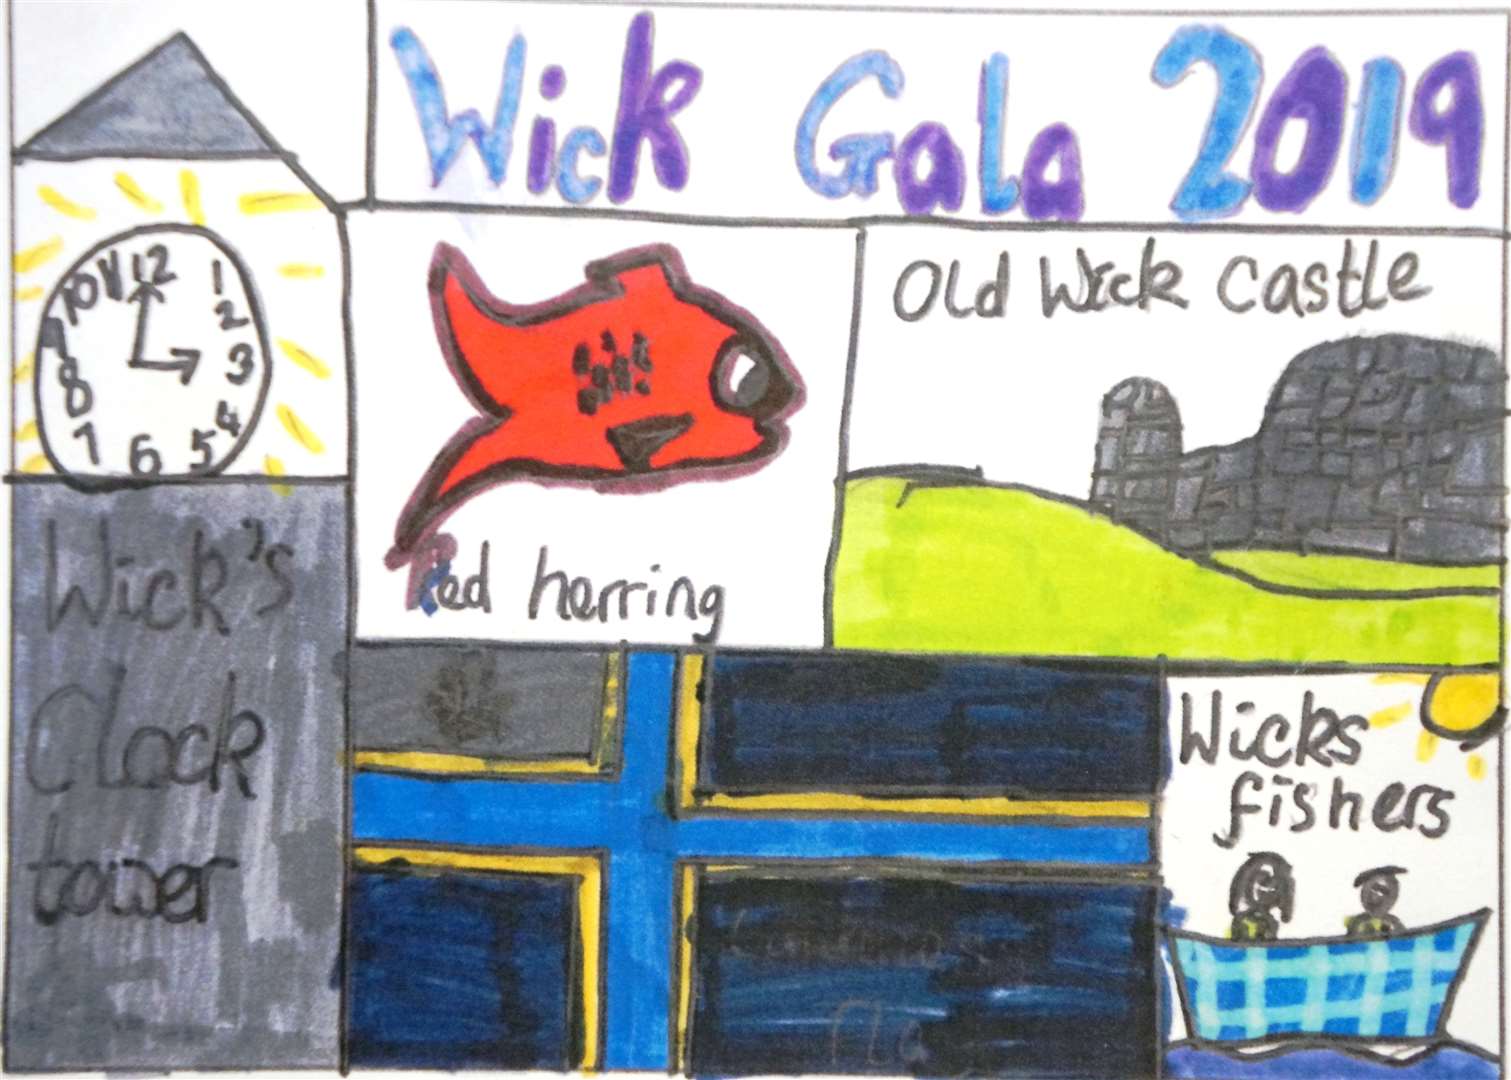 The cover art for the the Wick Gala Week programme was created by nine-year-old Hannah Baijal from Newton Park Primary School.